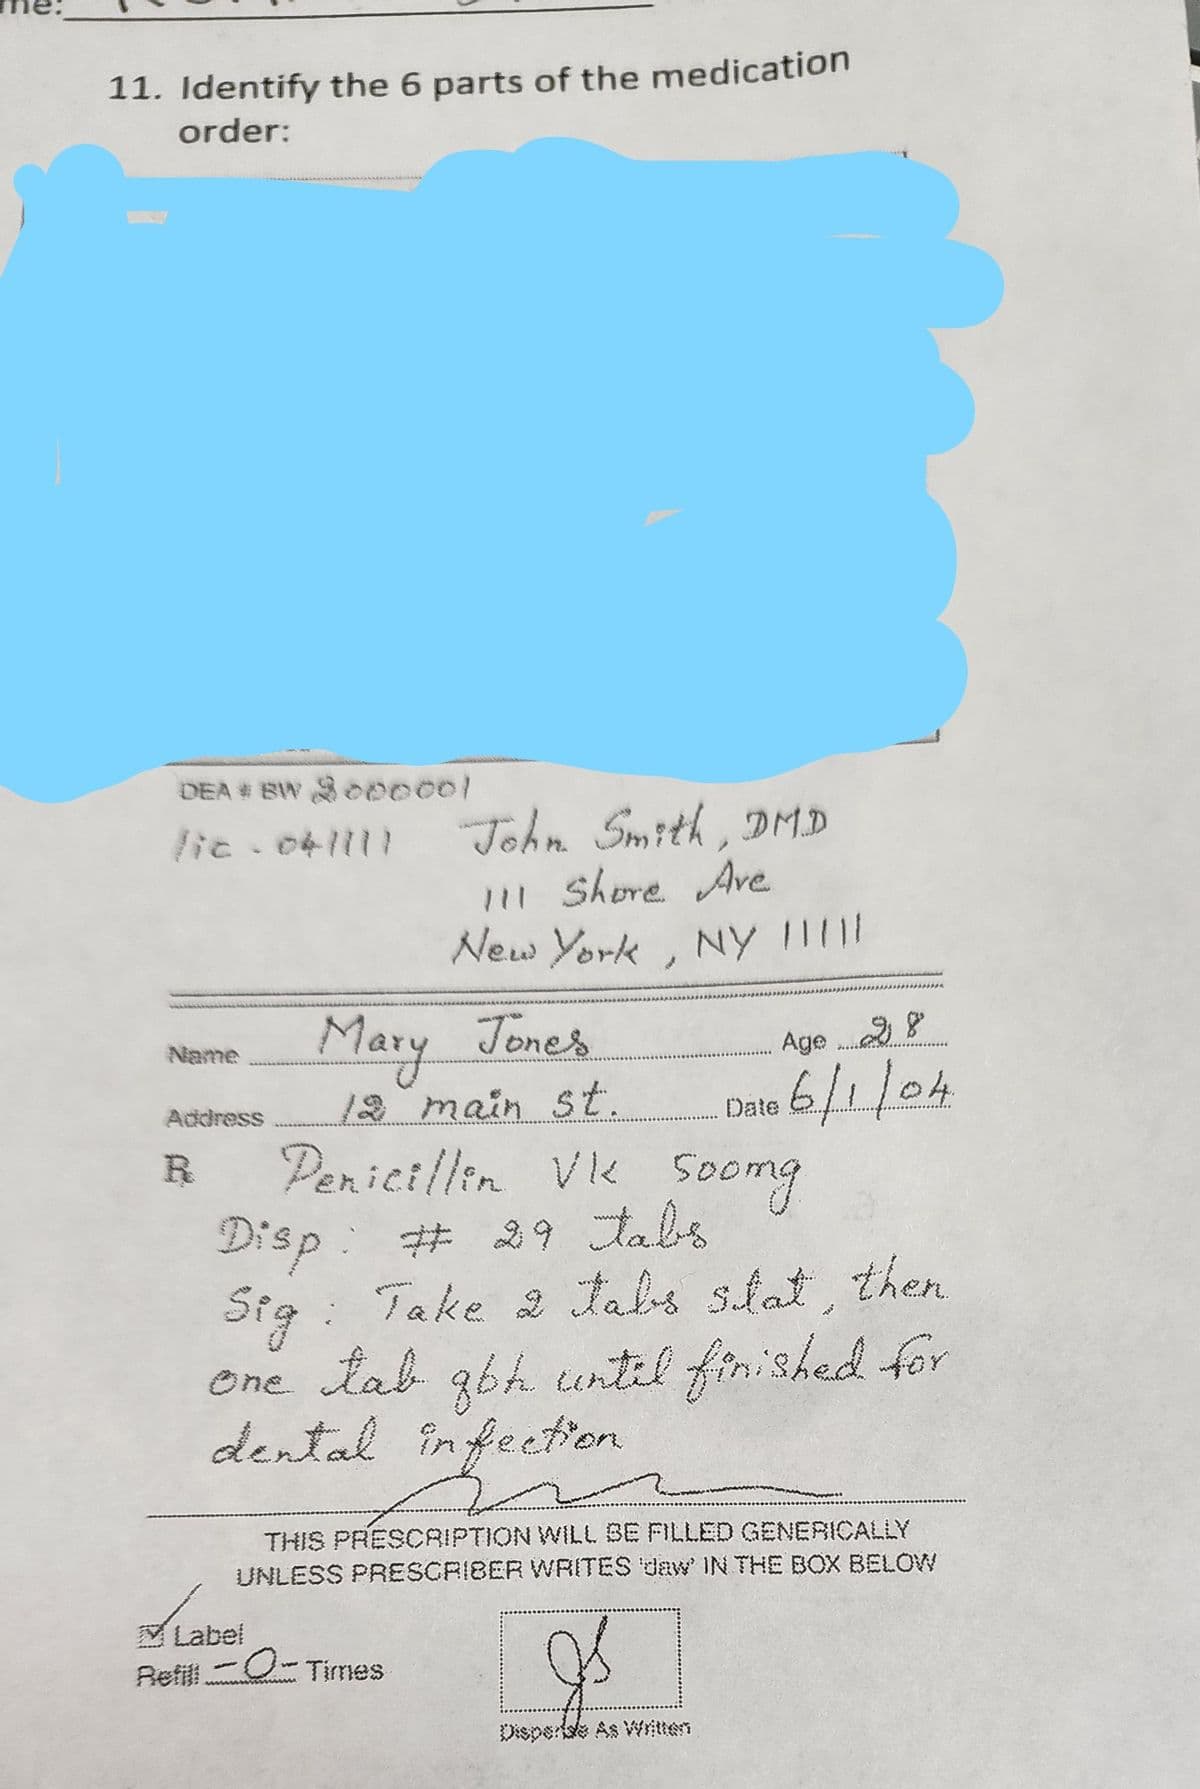 11. Identify the 6 parts of the medication
order:
DEA# BW 3000001
lic-04/111 John Smith, DMD
111 Shore Ave
New York, NY !!!!
Name
Address
R
Mary Jones
12 main st.
Age
Date 6/1/04
Penicillin Vk Soomg
Disp: # 29 tabs
Sig: Take 2 tabs slat, then
one tab gbh until finished for
infection
dental infection
THIS PRESCRIPTION WILL BE FILLED GENERICALLY
UNLESS PRESCRIBER WRITES 'daw IN THE BOX BELOW
Is
Label
Refill -- Times